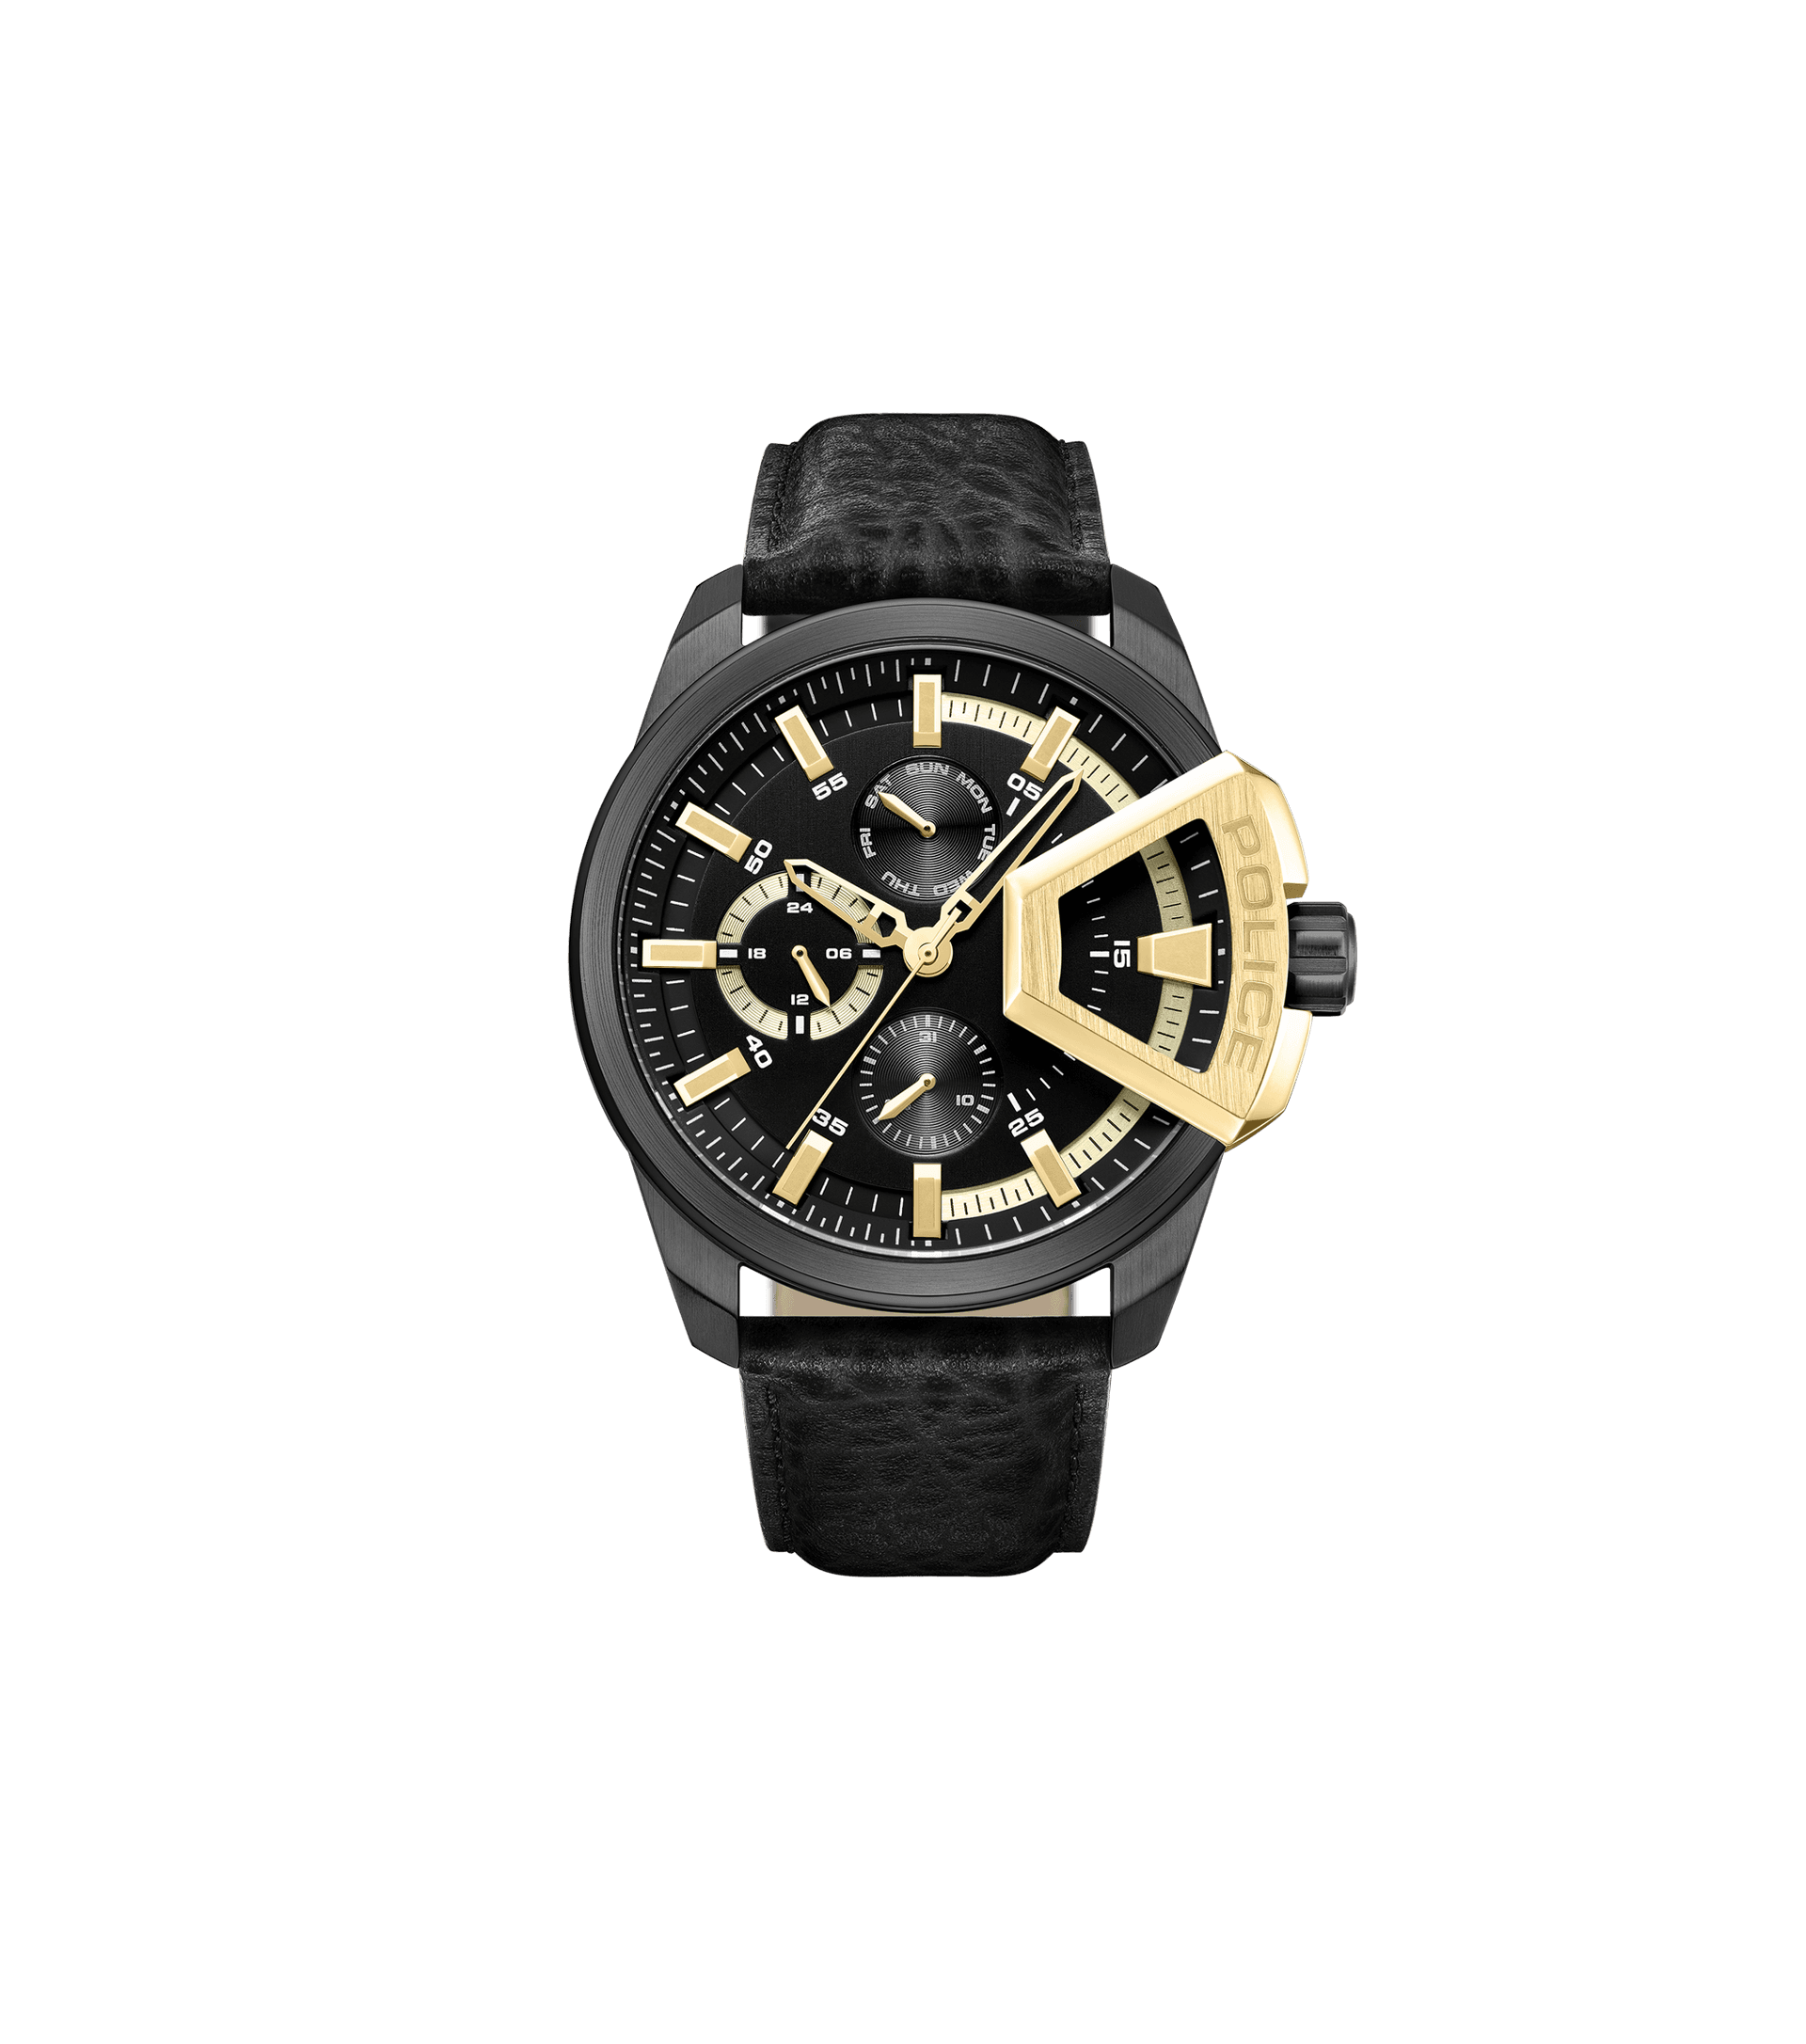 Set Bracelet For Watch Gift Black, Police - Black And Police Men Anniversary By Gold, watches The Collection